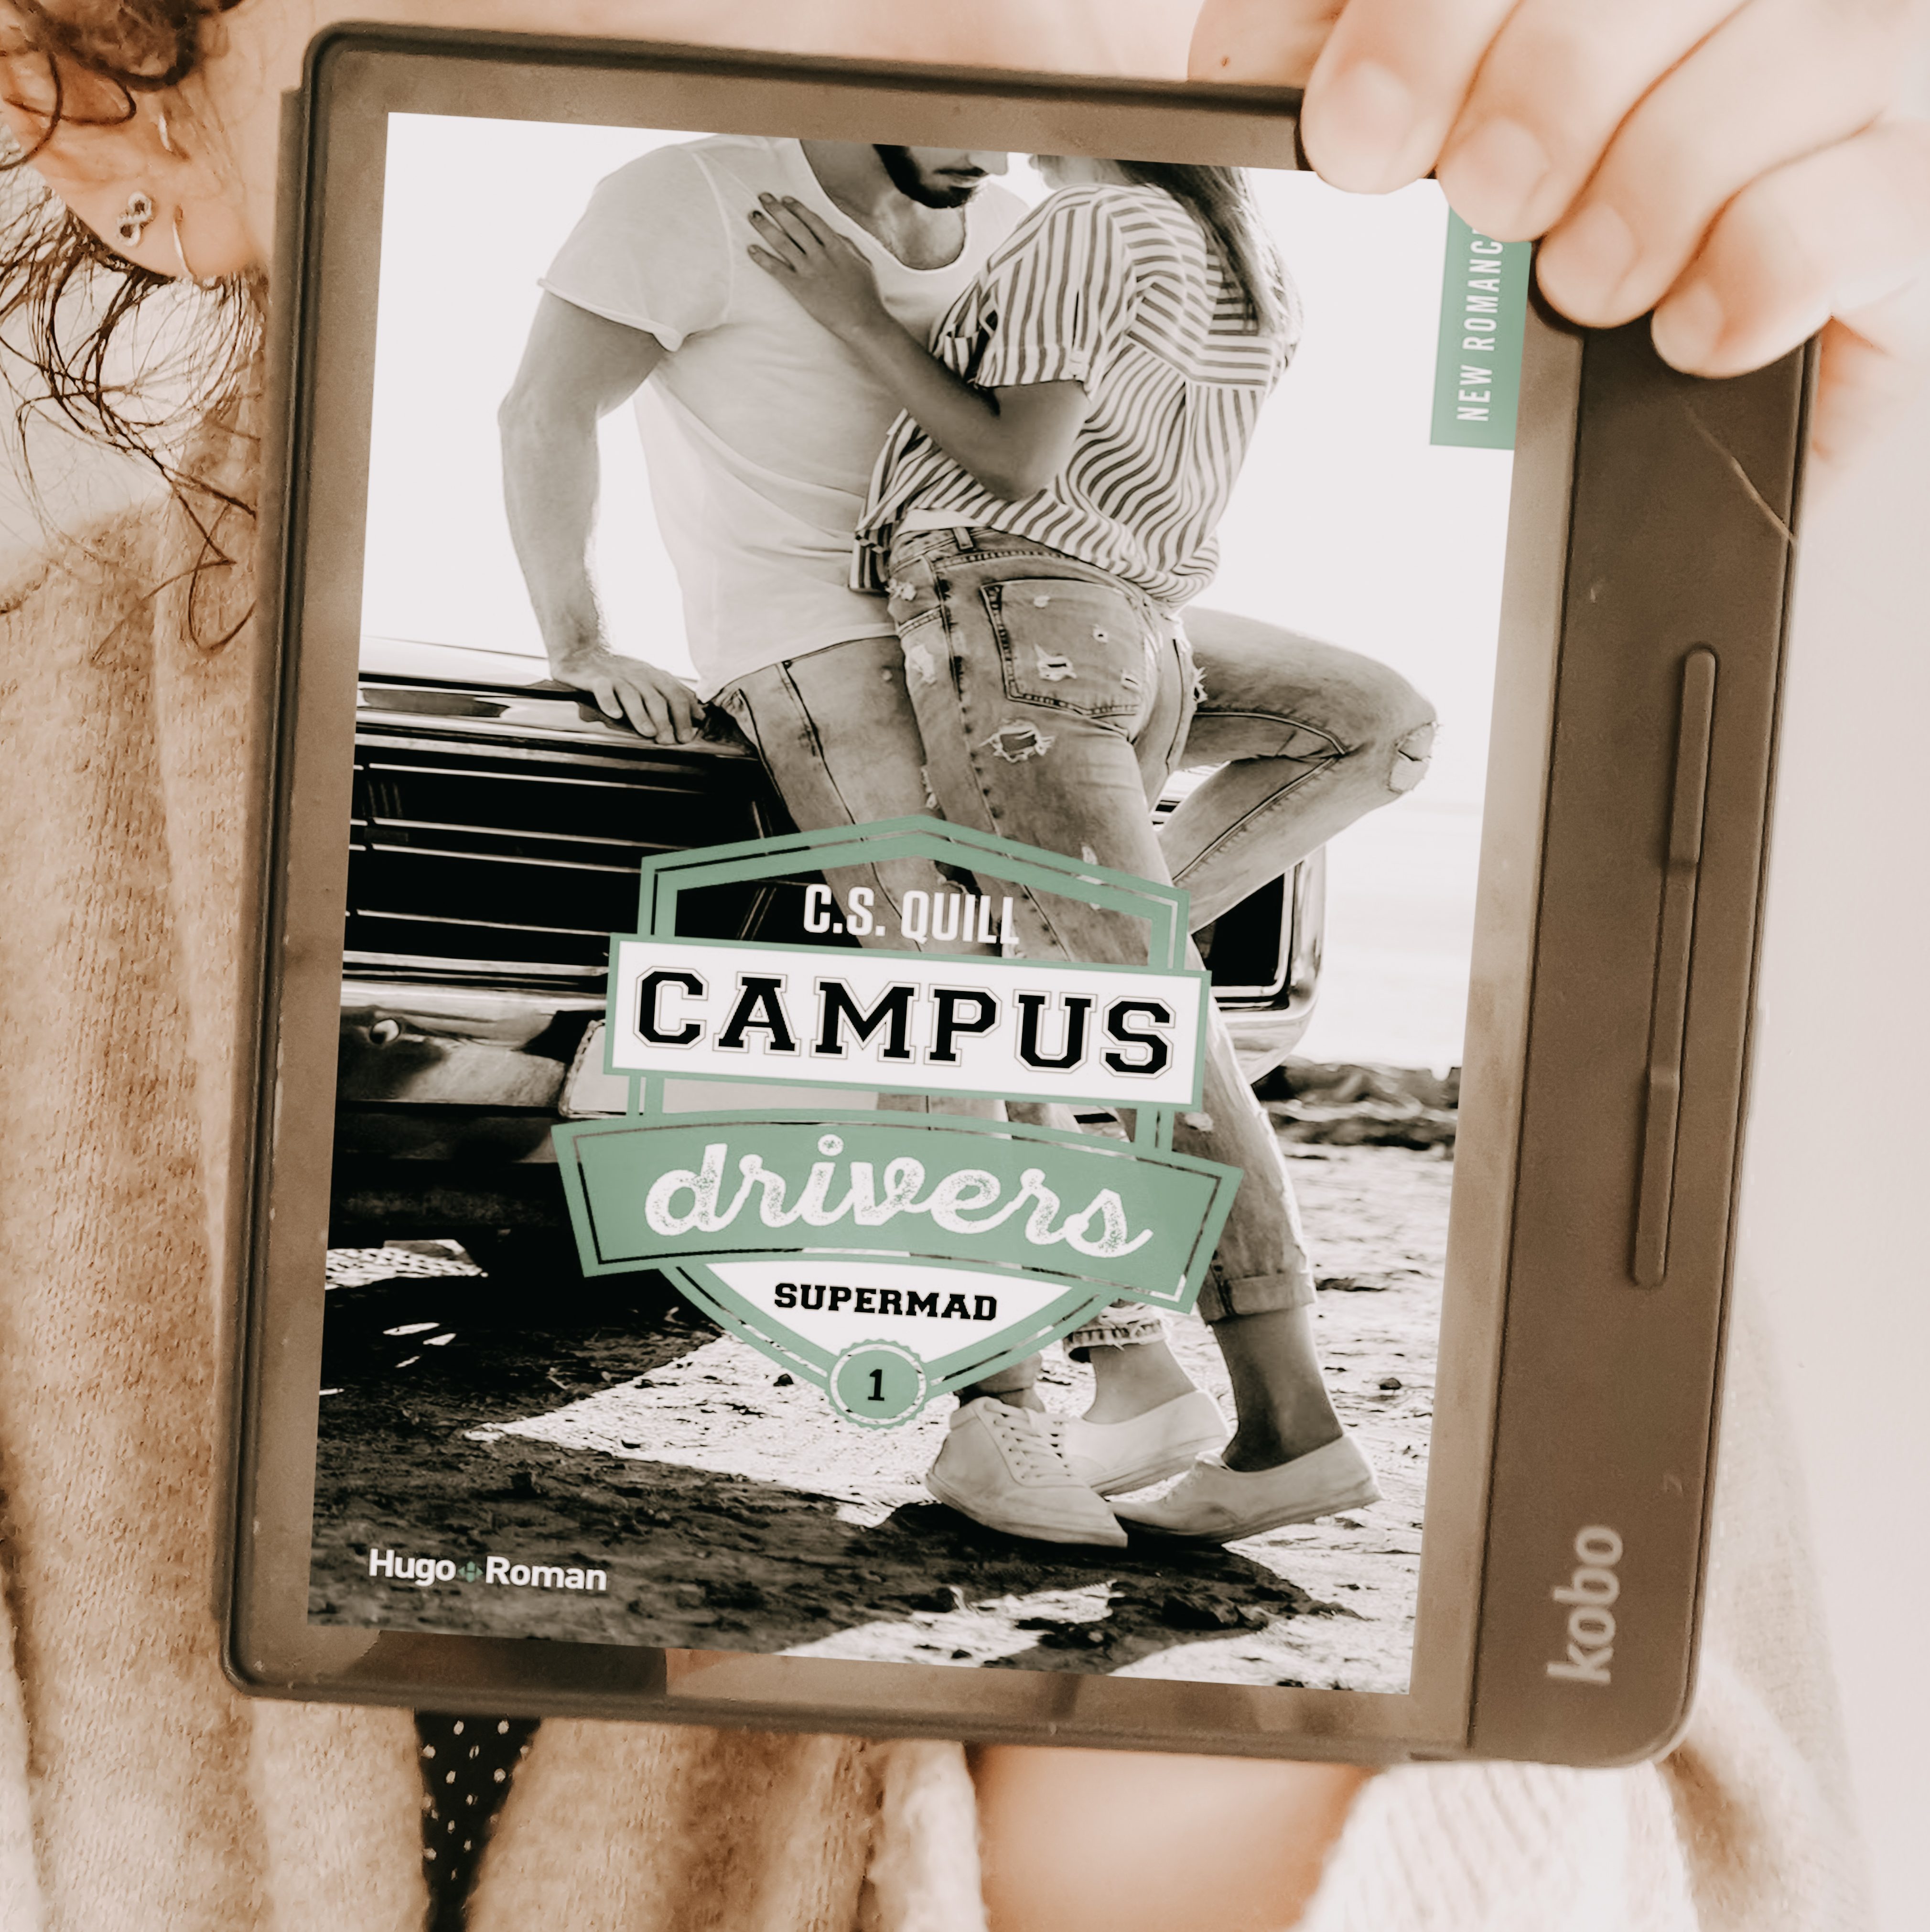 Supermad, Campus drivers, tome 1 de C.S. Quill – Ma petite